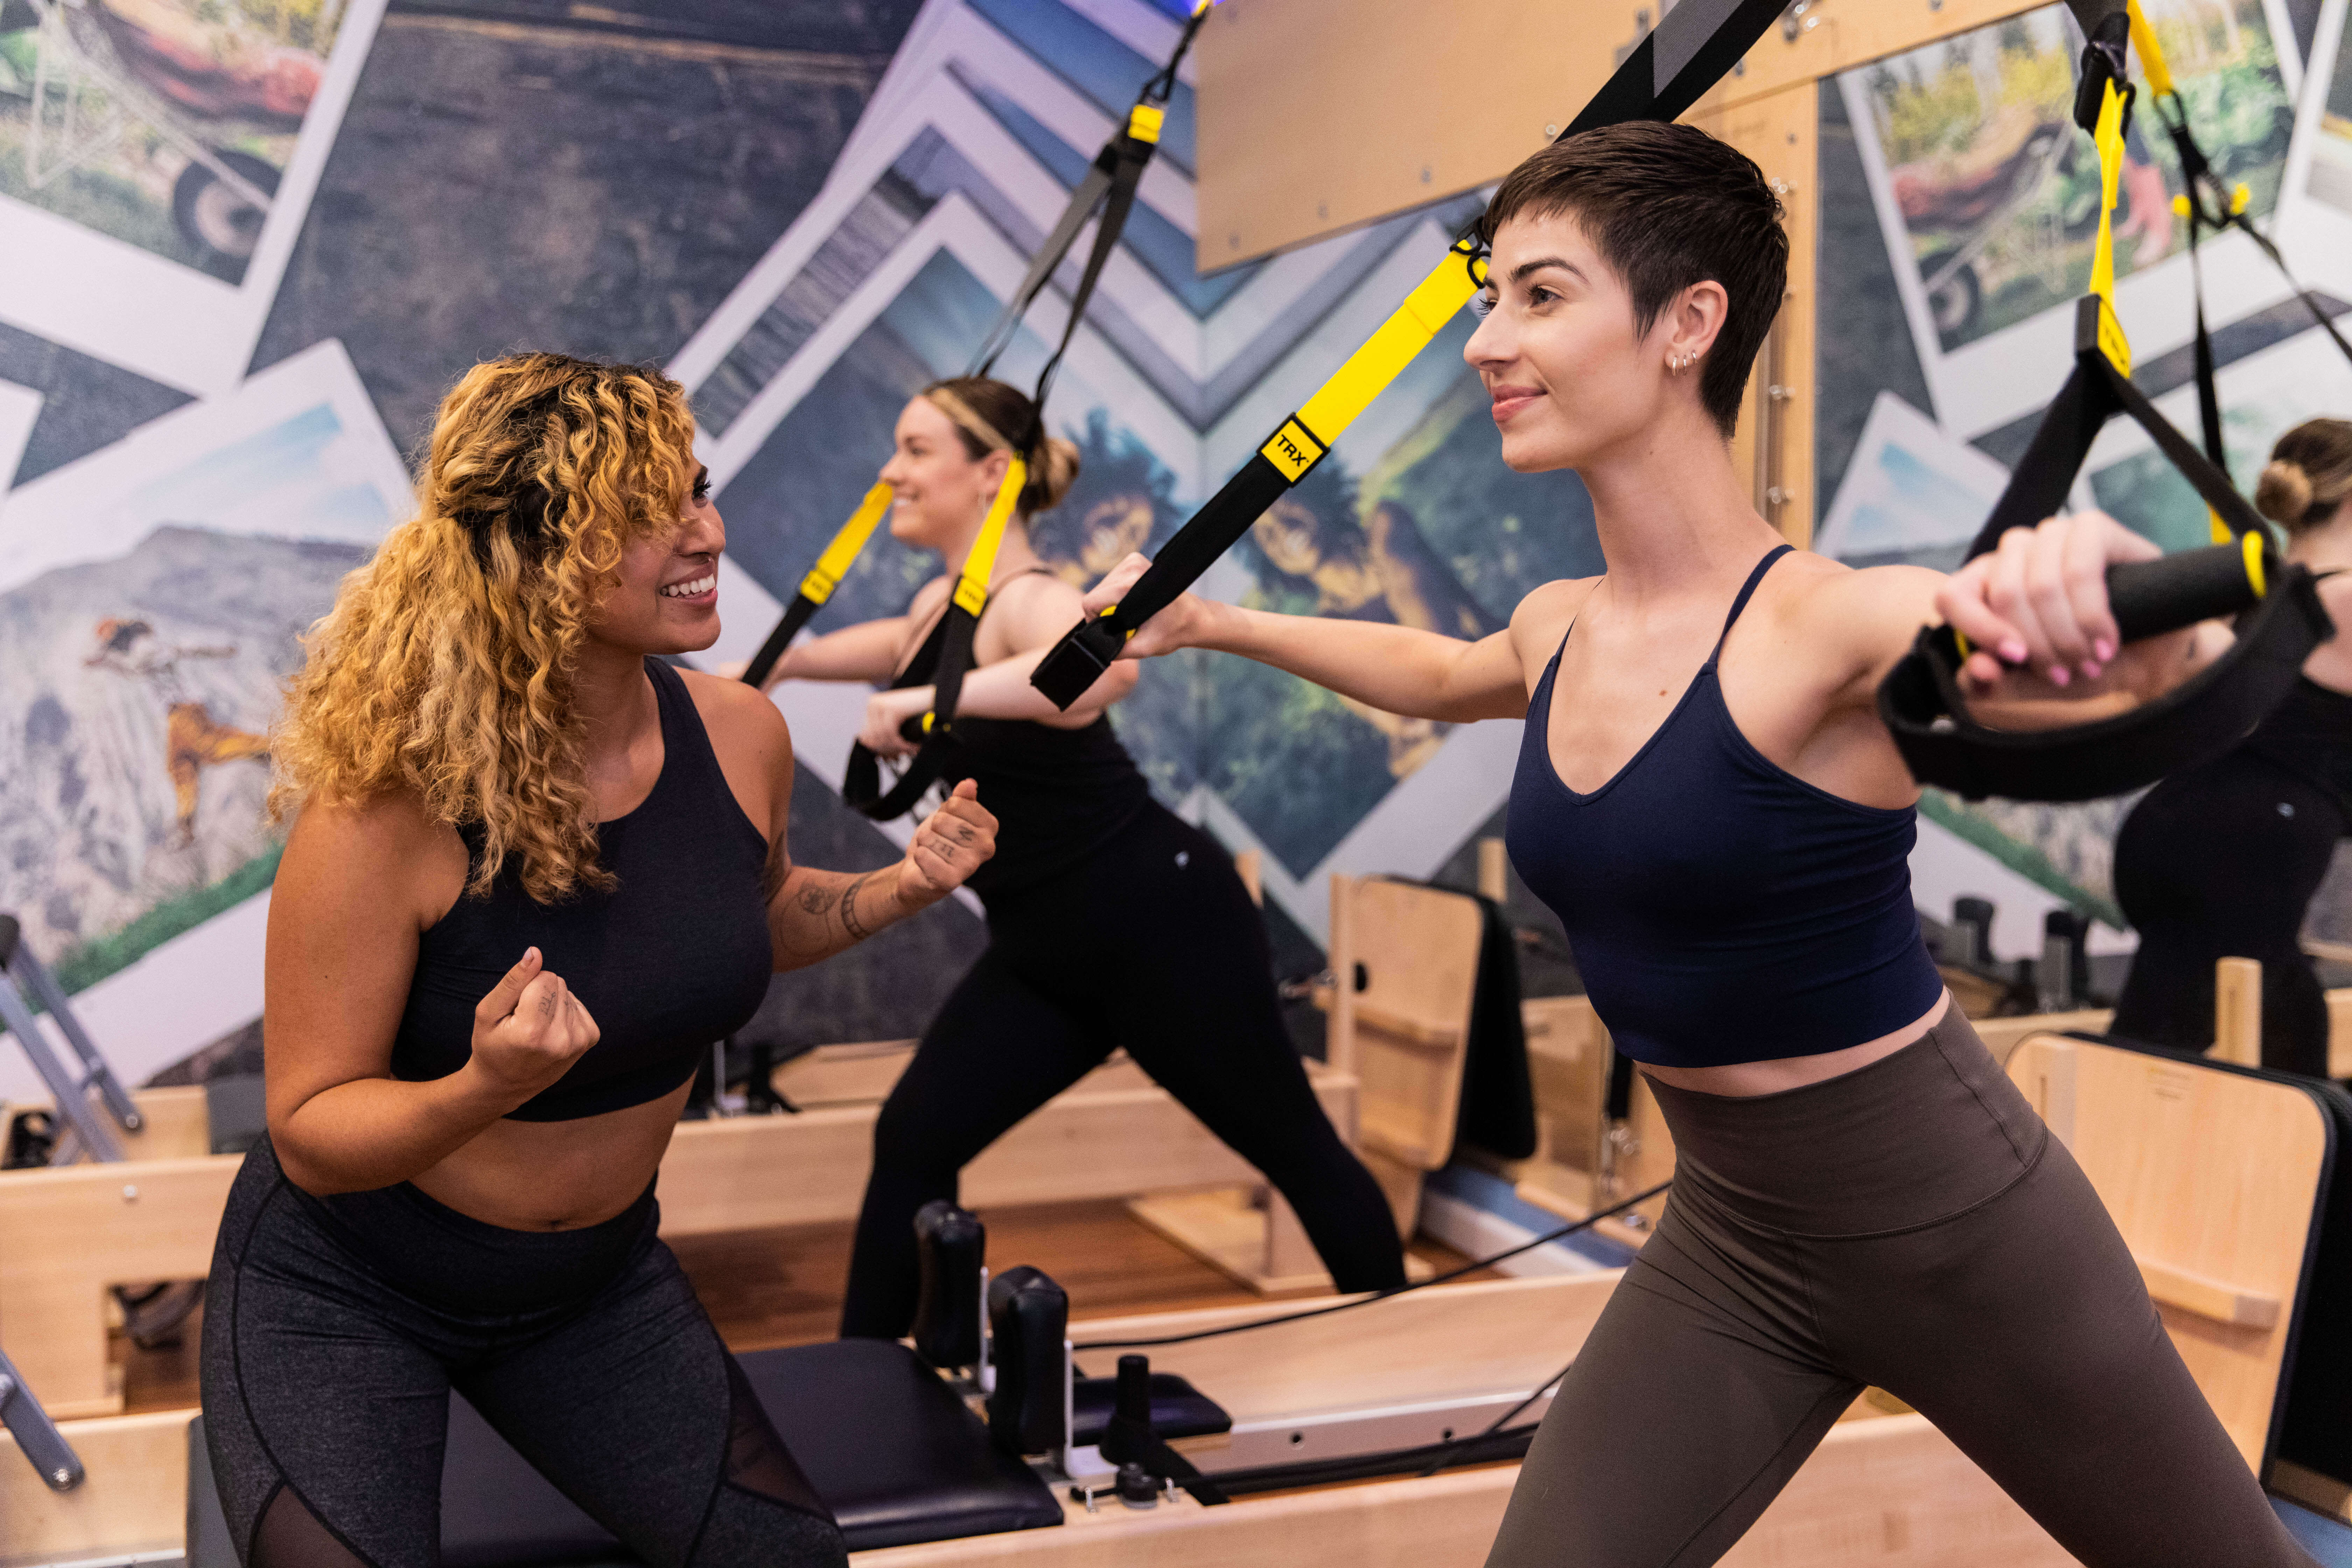 Our very first TRX-based CP Suspend 1.5 class is going at full force! A new  challenge at our studio! 💪⁣⁣ ⁣⁣ Thank you Mel for being such an awesome